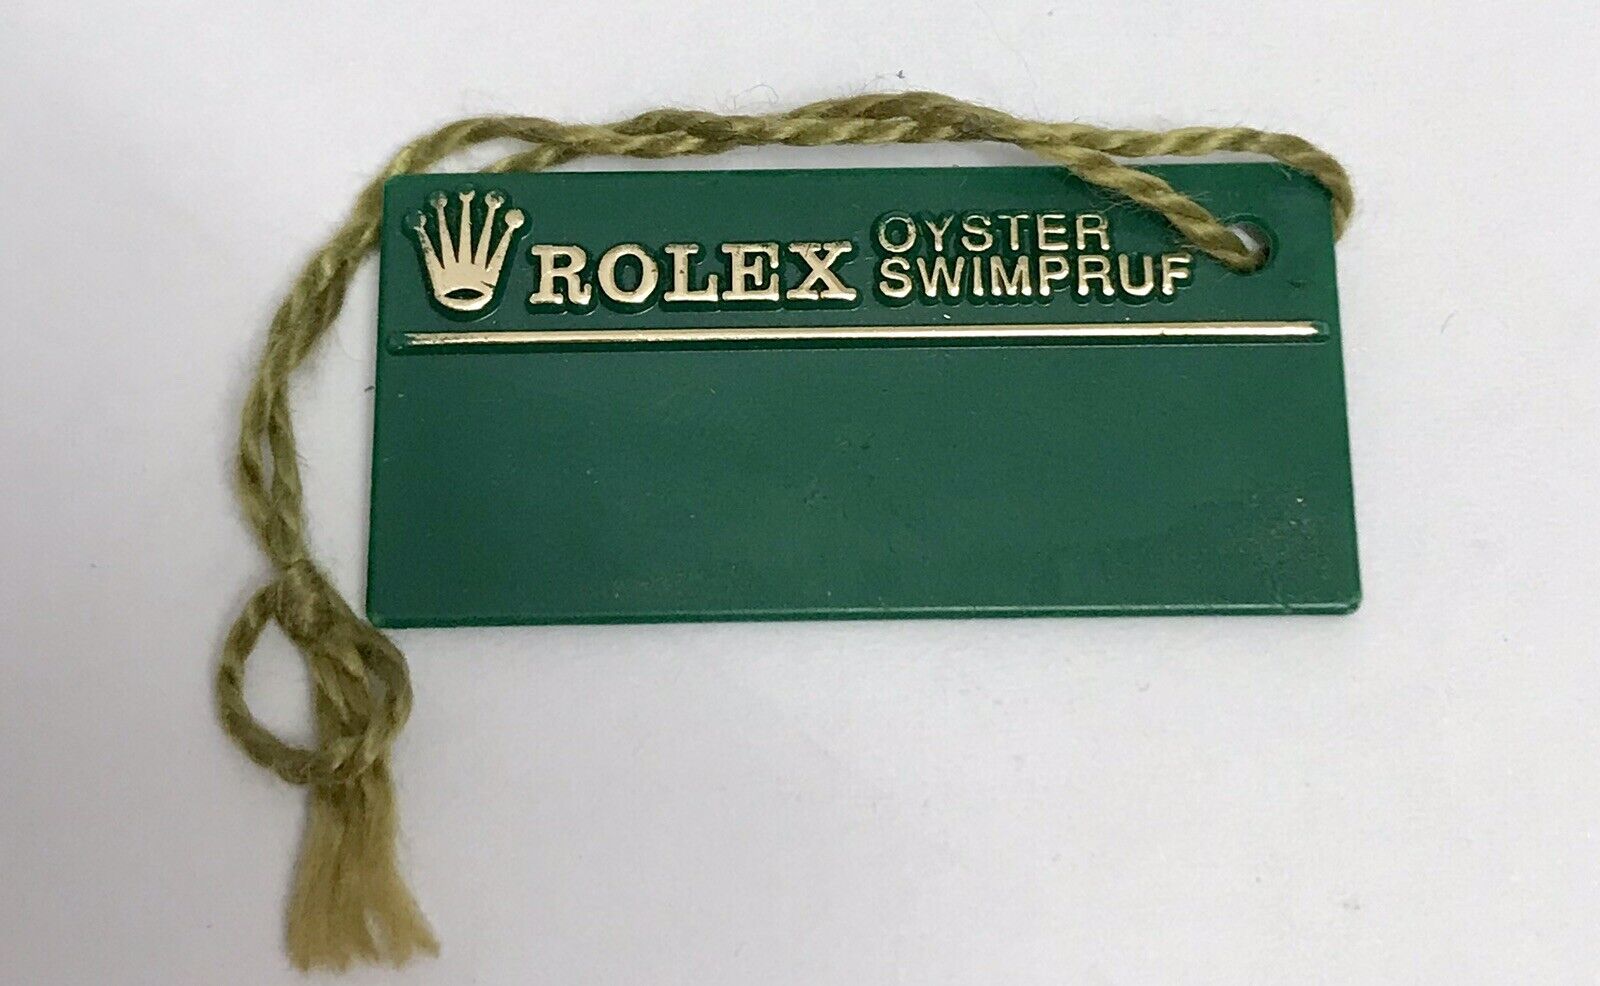 ROLEX Green Tag Hangtag Oyster Swimpruf GMT 16750 16700 16710 16760 PEPSI COKE